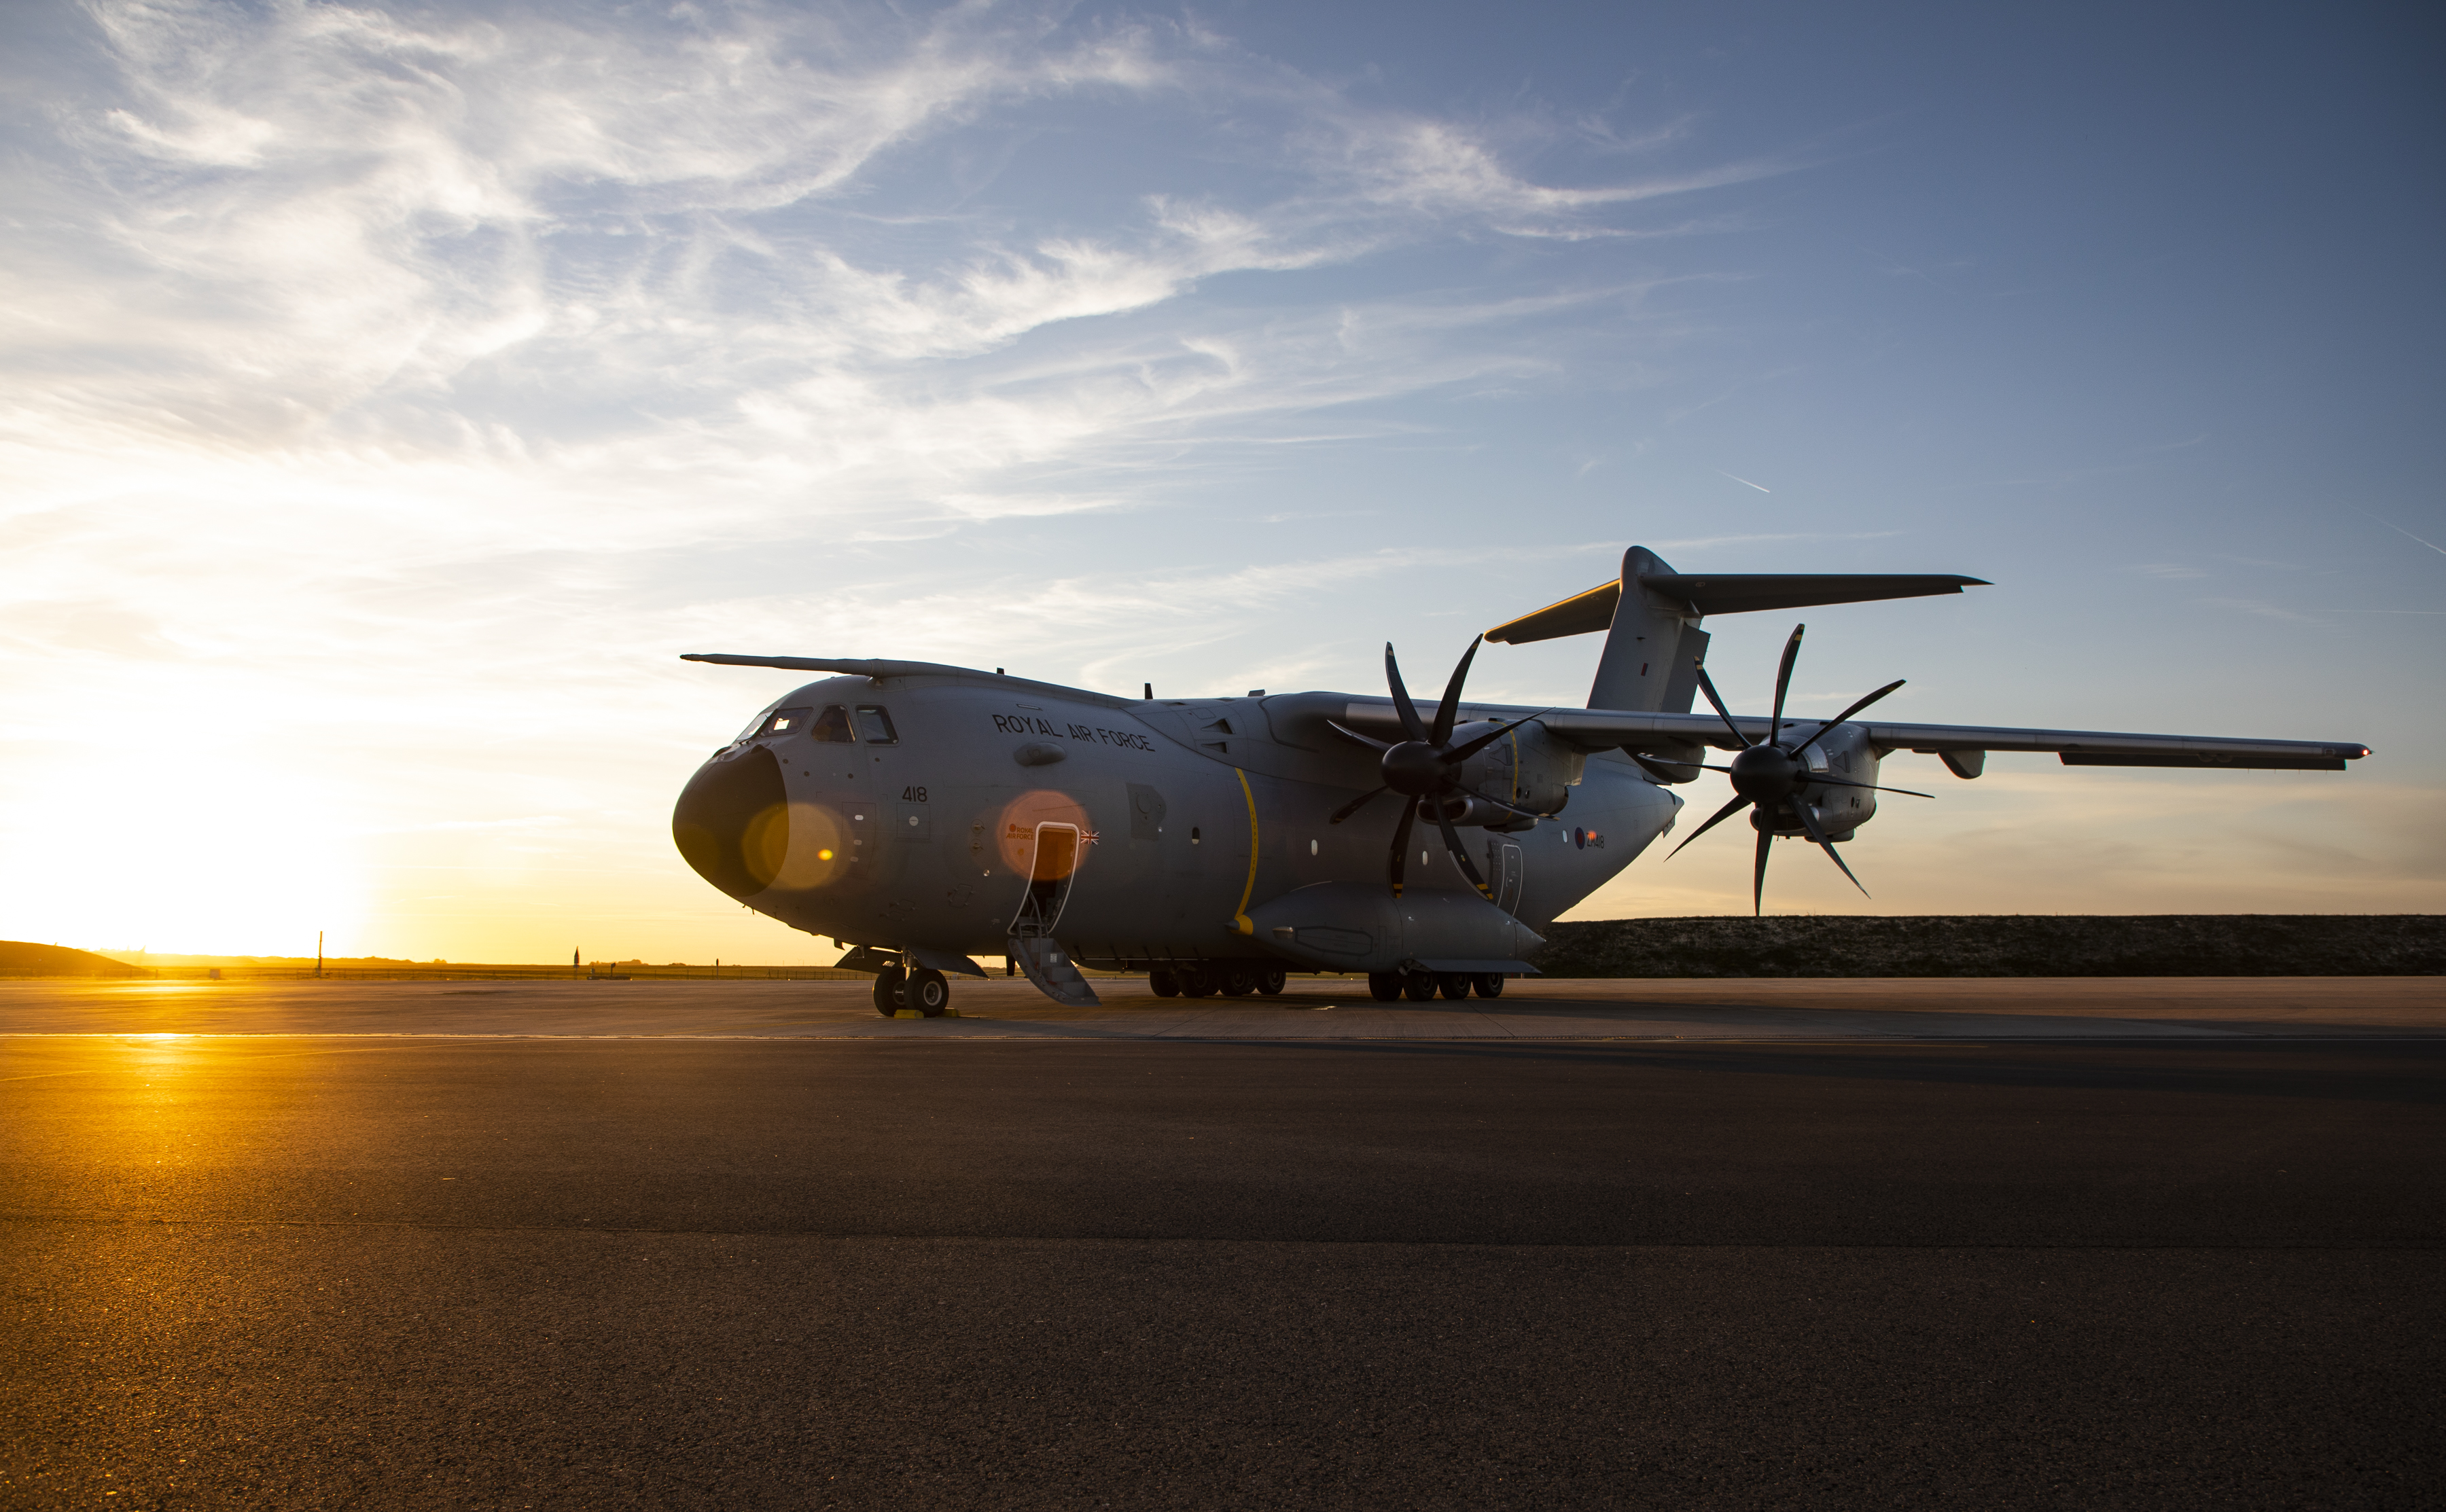 Image shows a RAF Atlas on the airfield with sunset.